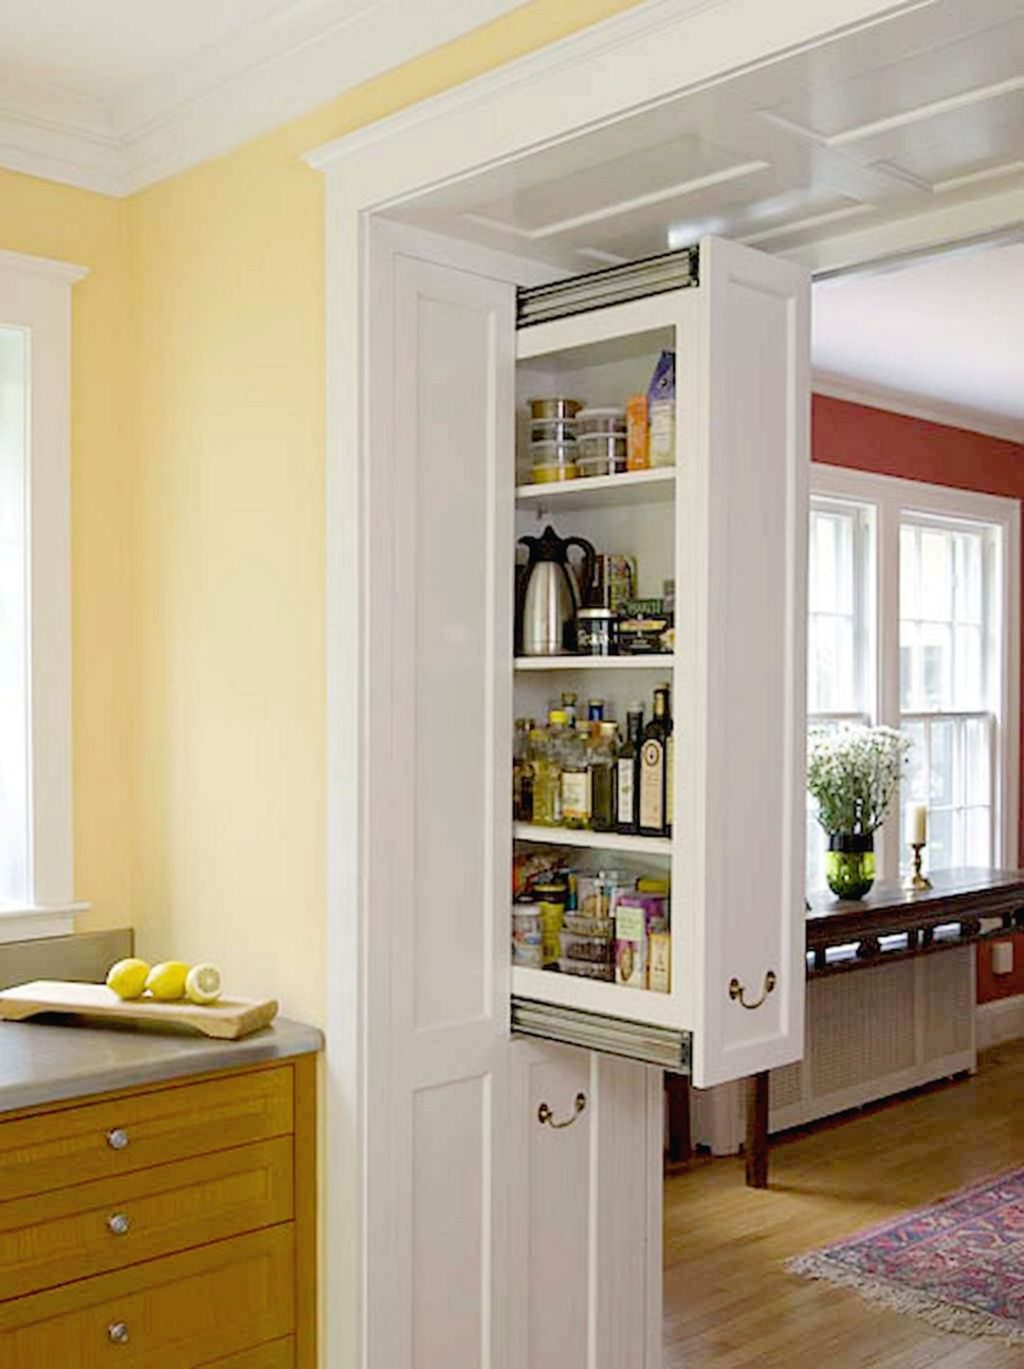 Clever Hidden Storage Organizing Ideas for Small Kitchen